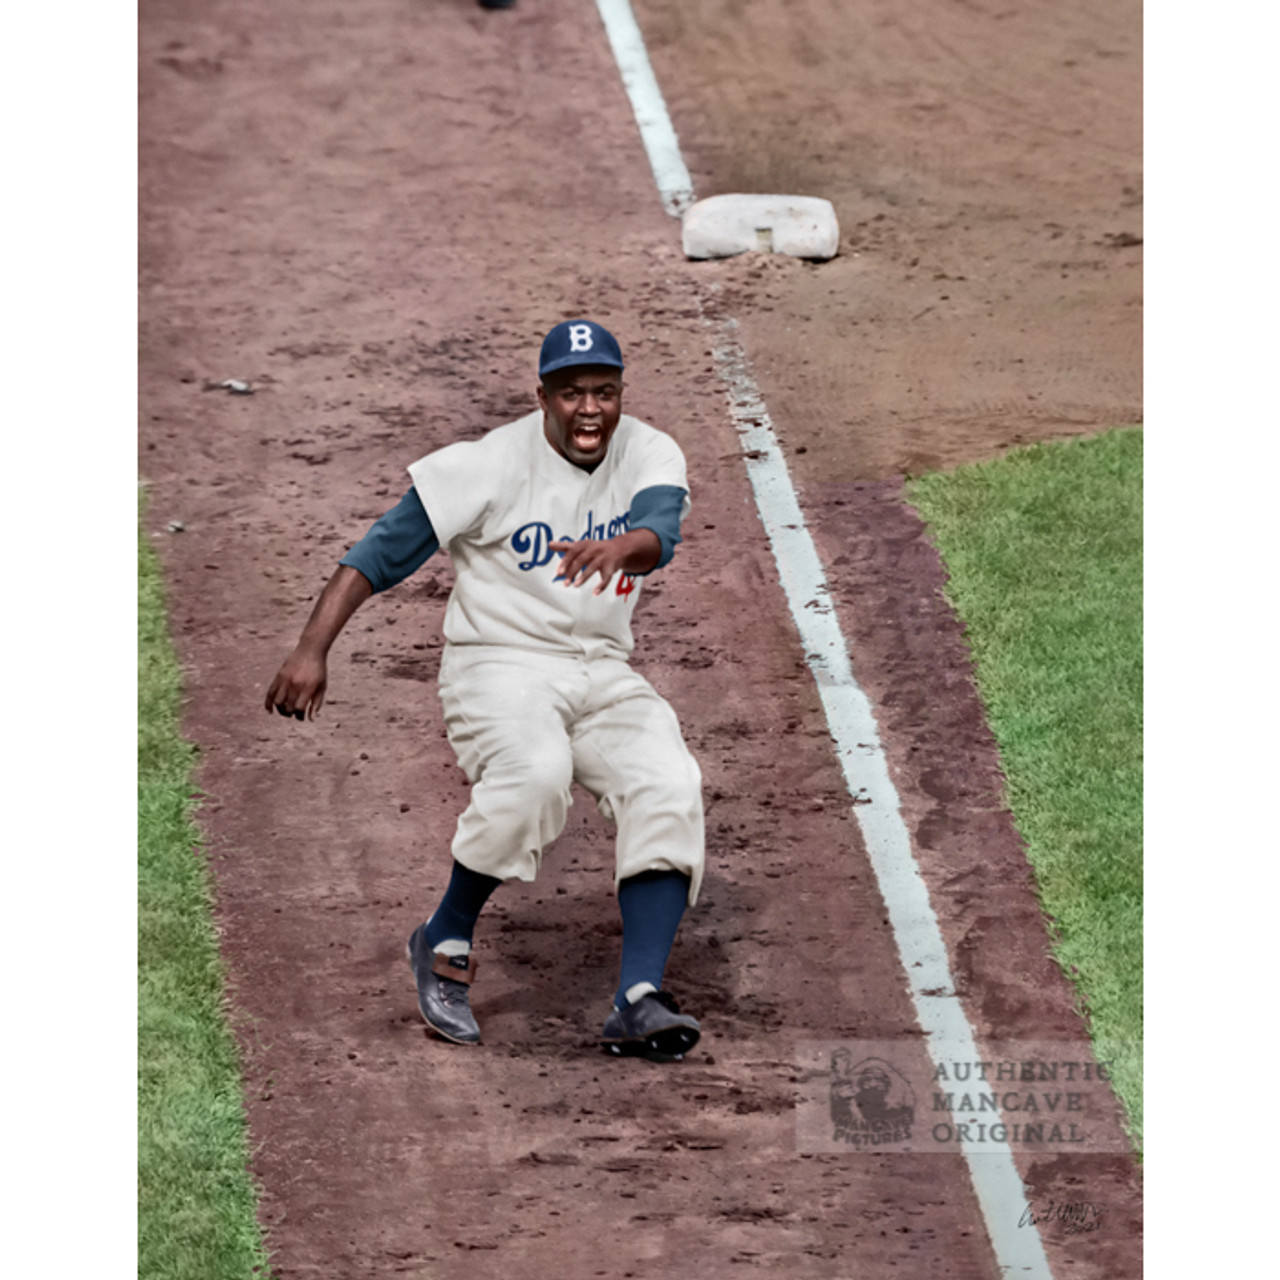 Jackie Robinson 1947 Brooklyn Dodgers Clubhouse 11 x 14 Colorized Print